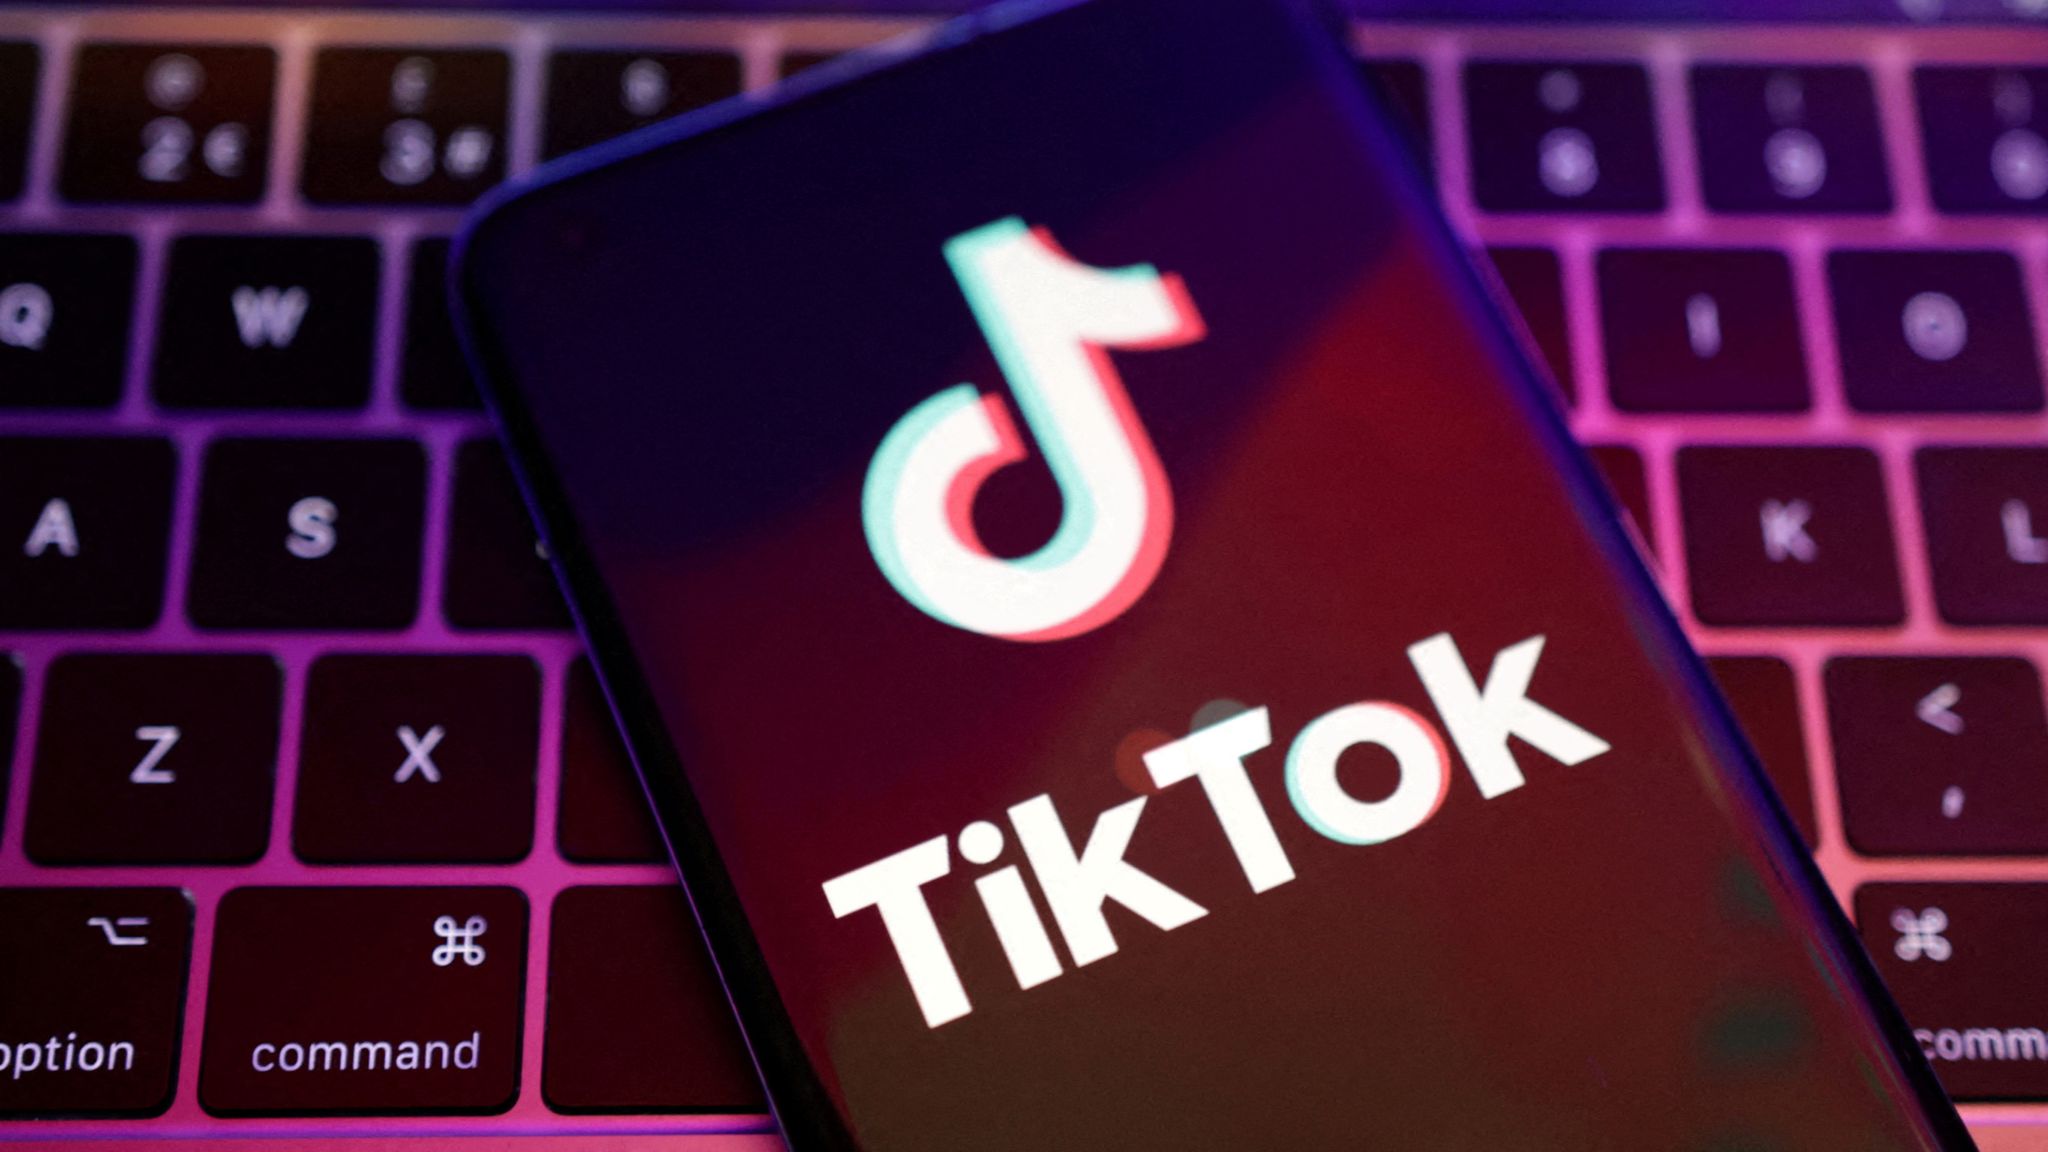 TikTok sues Montana after US state bans Chinese-owned video app